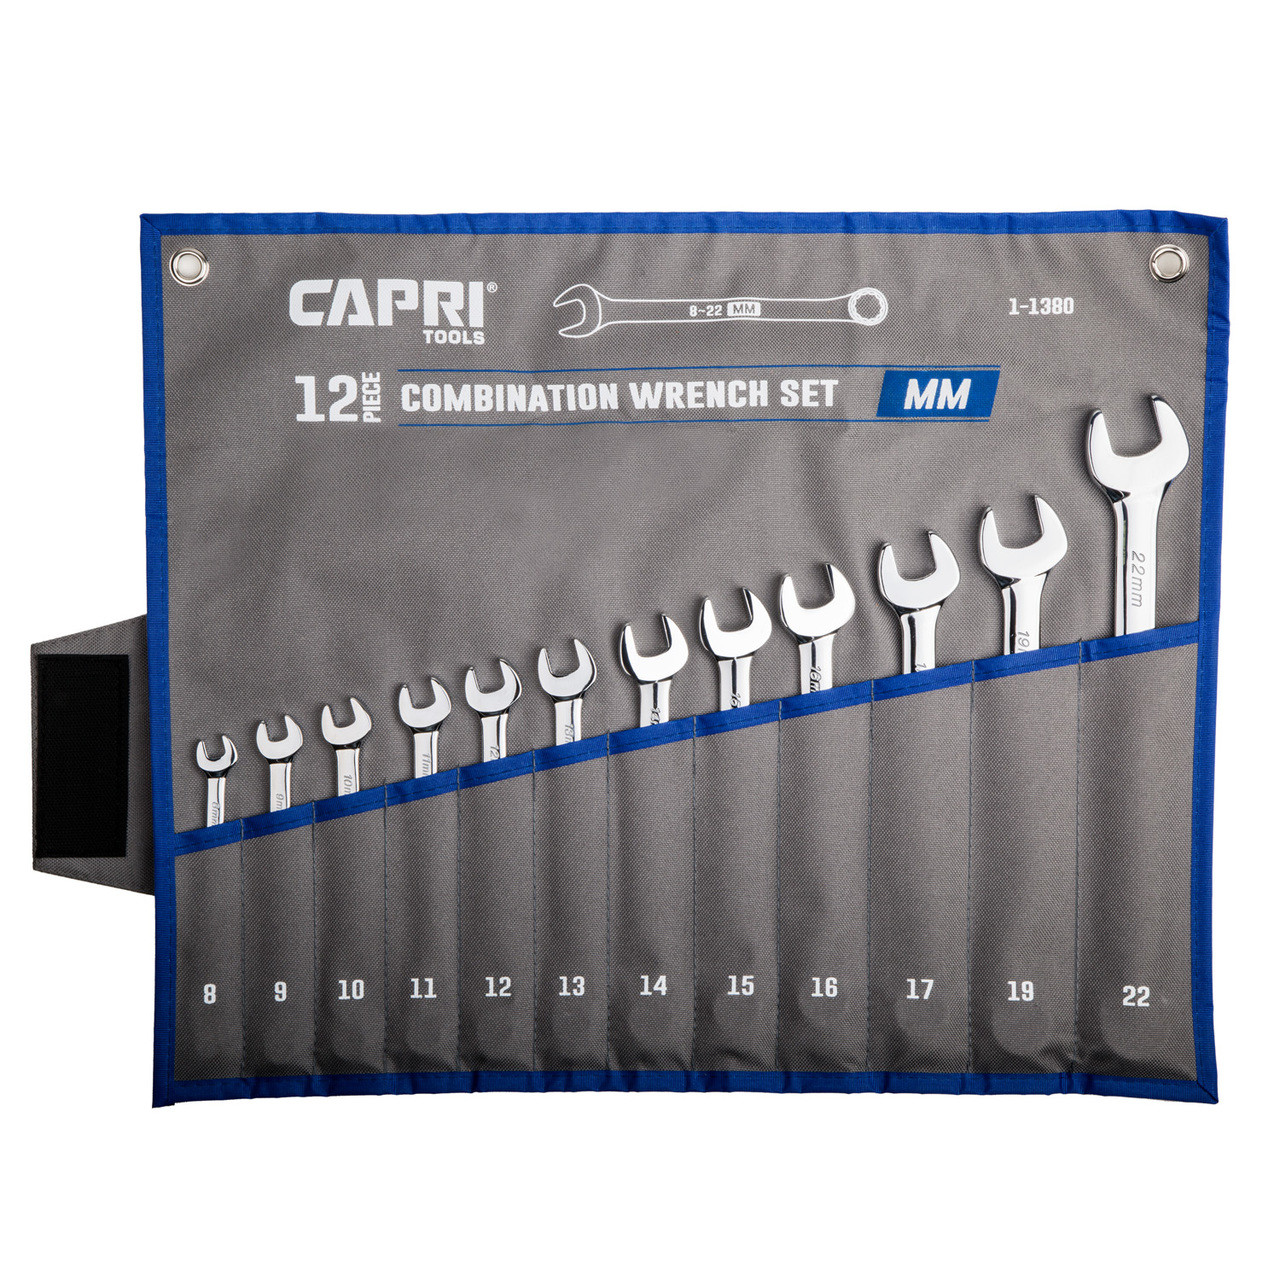 Capri Tools Combination Wrench Set, 12-Piece, Metric 8 to 22 mm, Heavy Duty Canvas Pouch